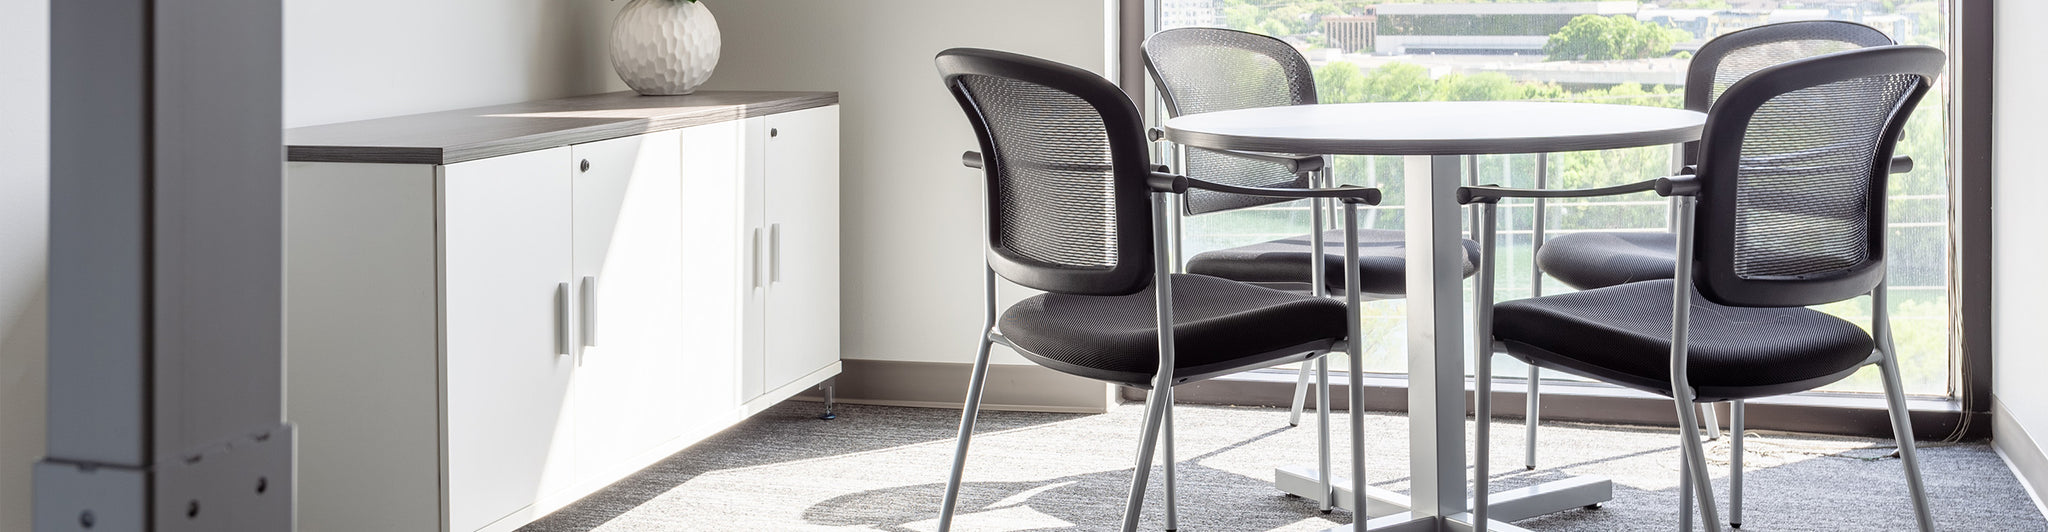 Office Collaboration Furniture